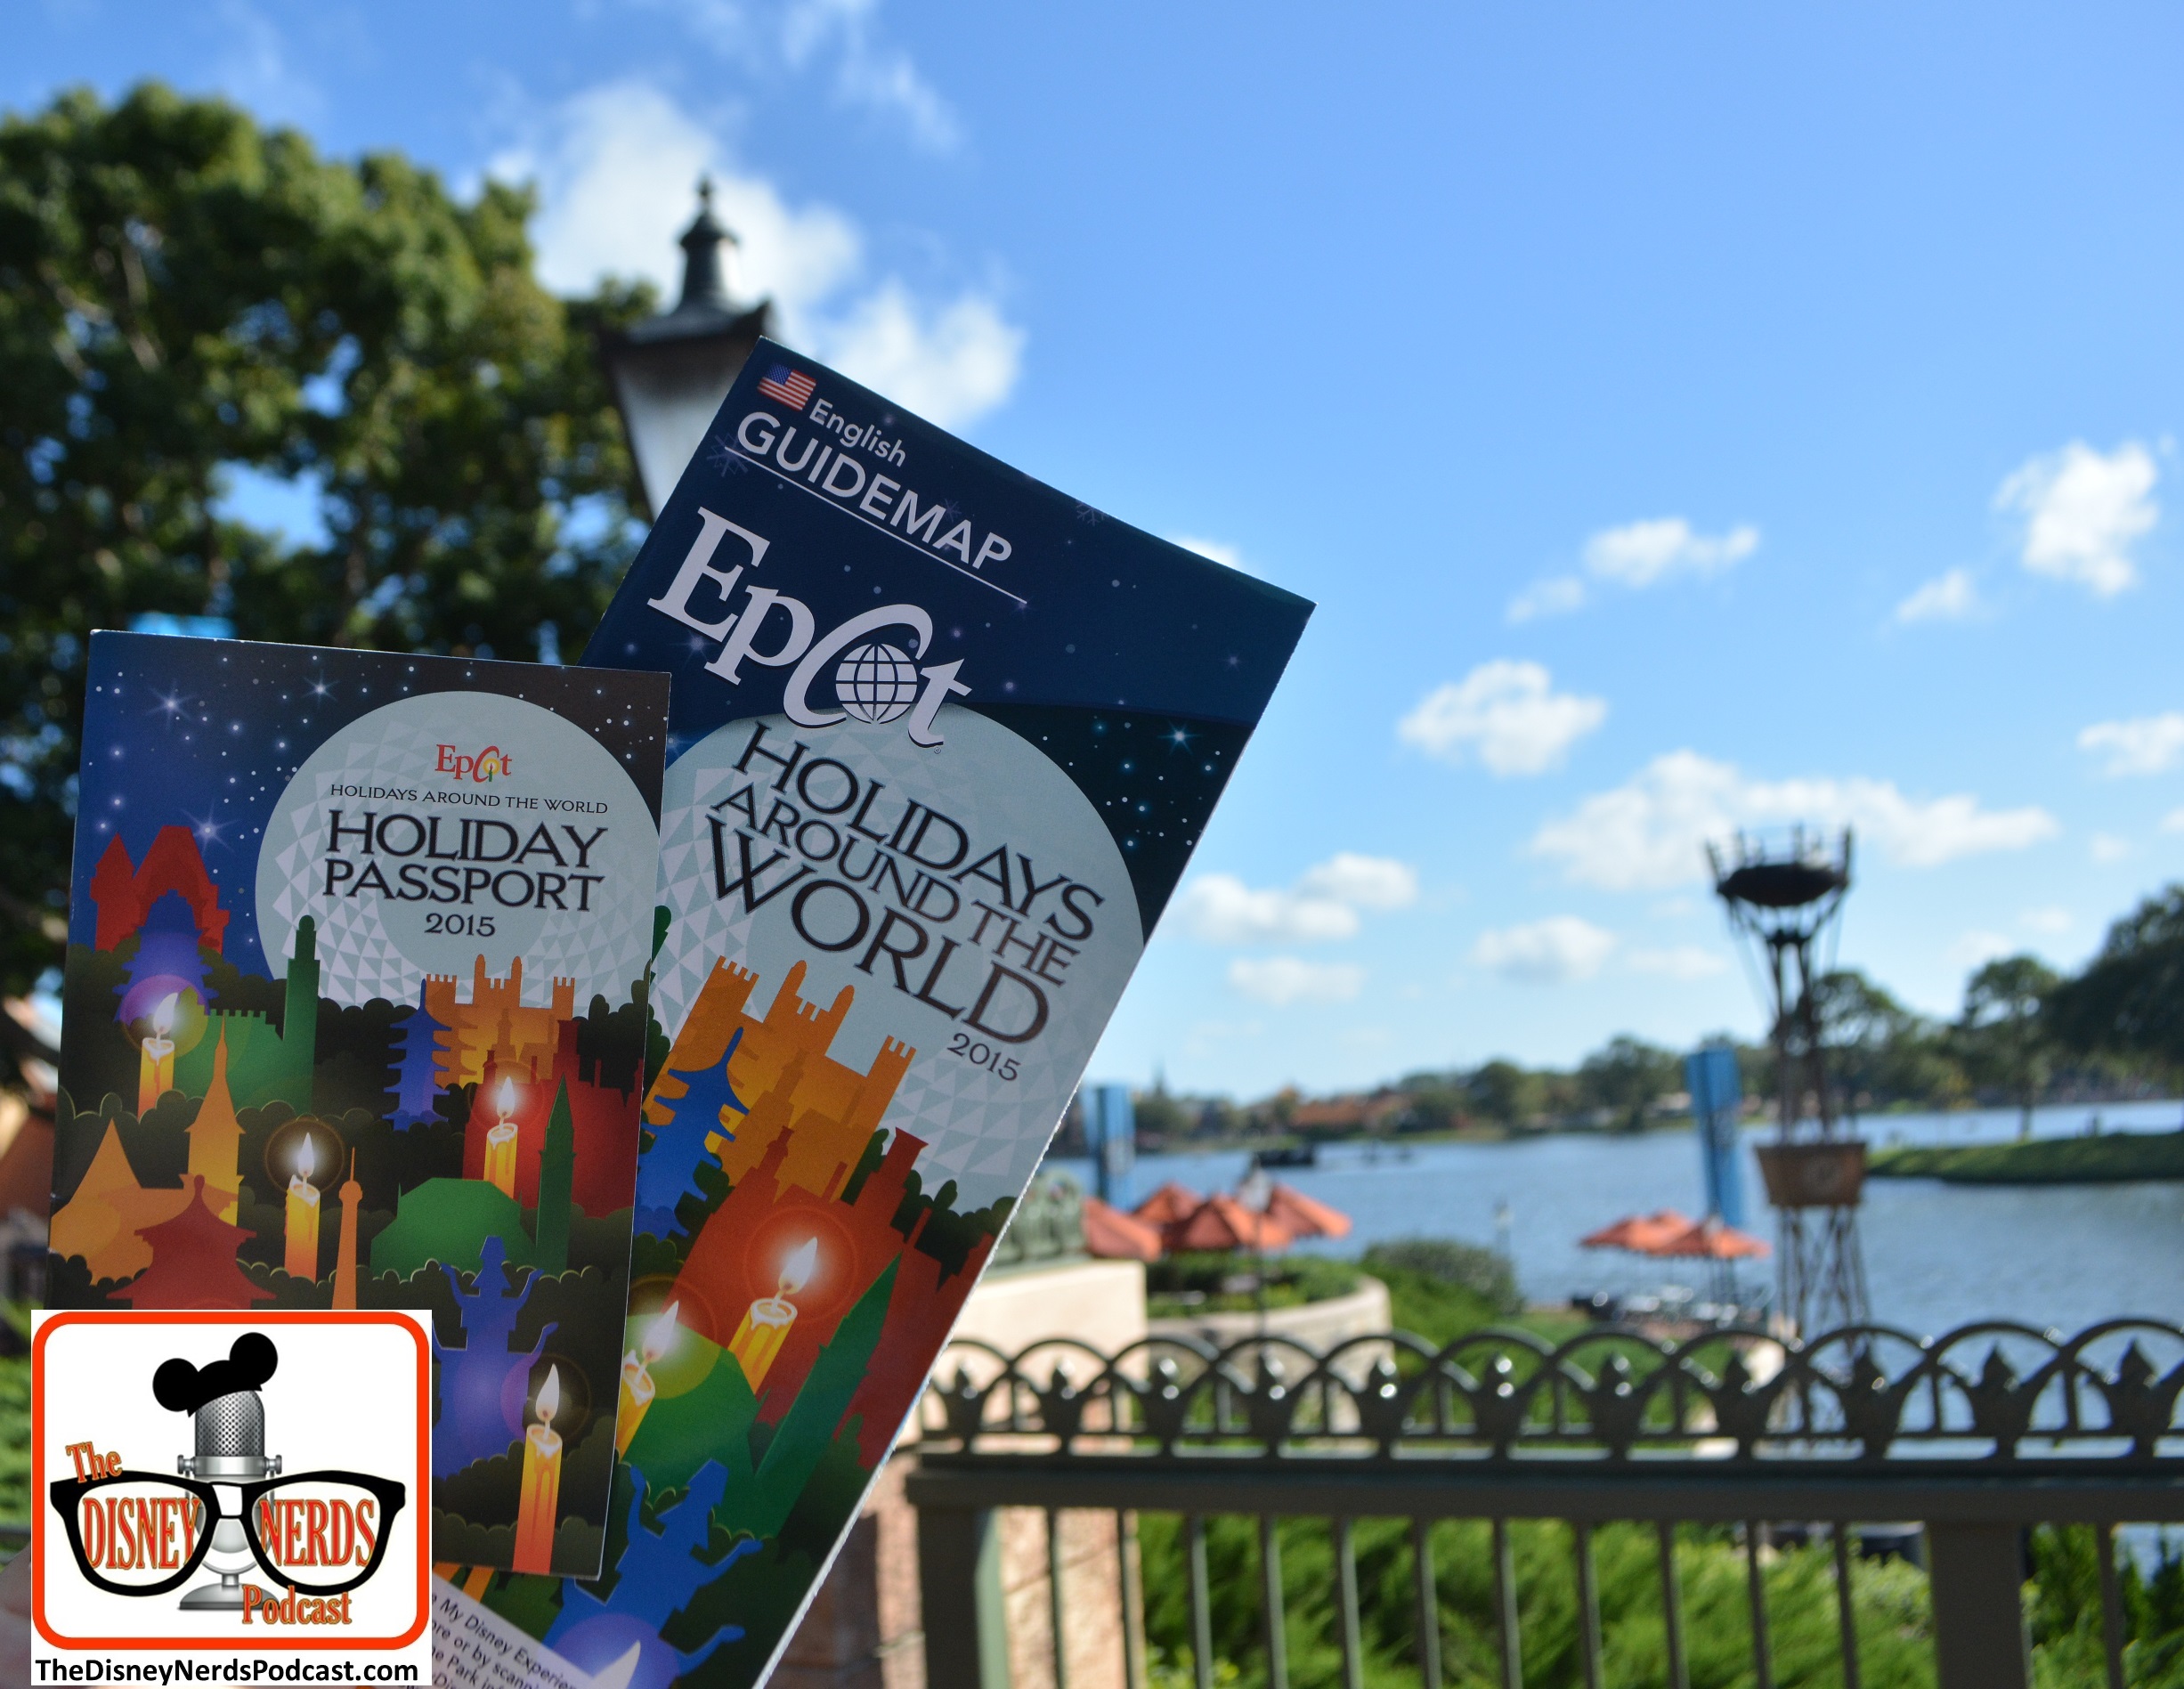 2015-12 - Epcot - The Holidays are in full Swing at Epcot's "Holidays Around the World" - Including a new Holiday Passport